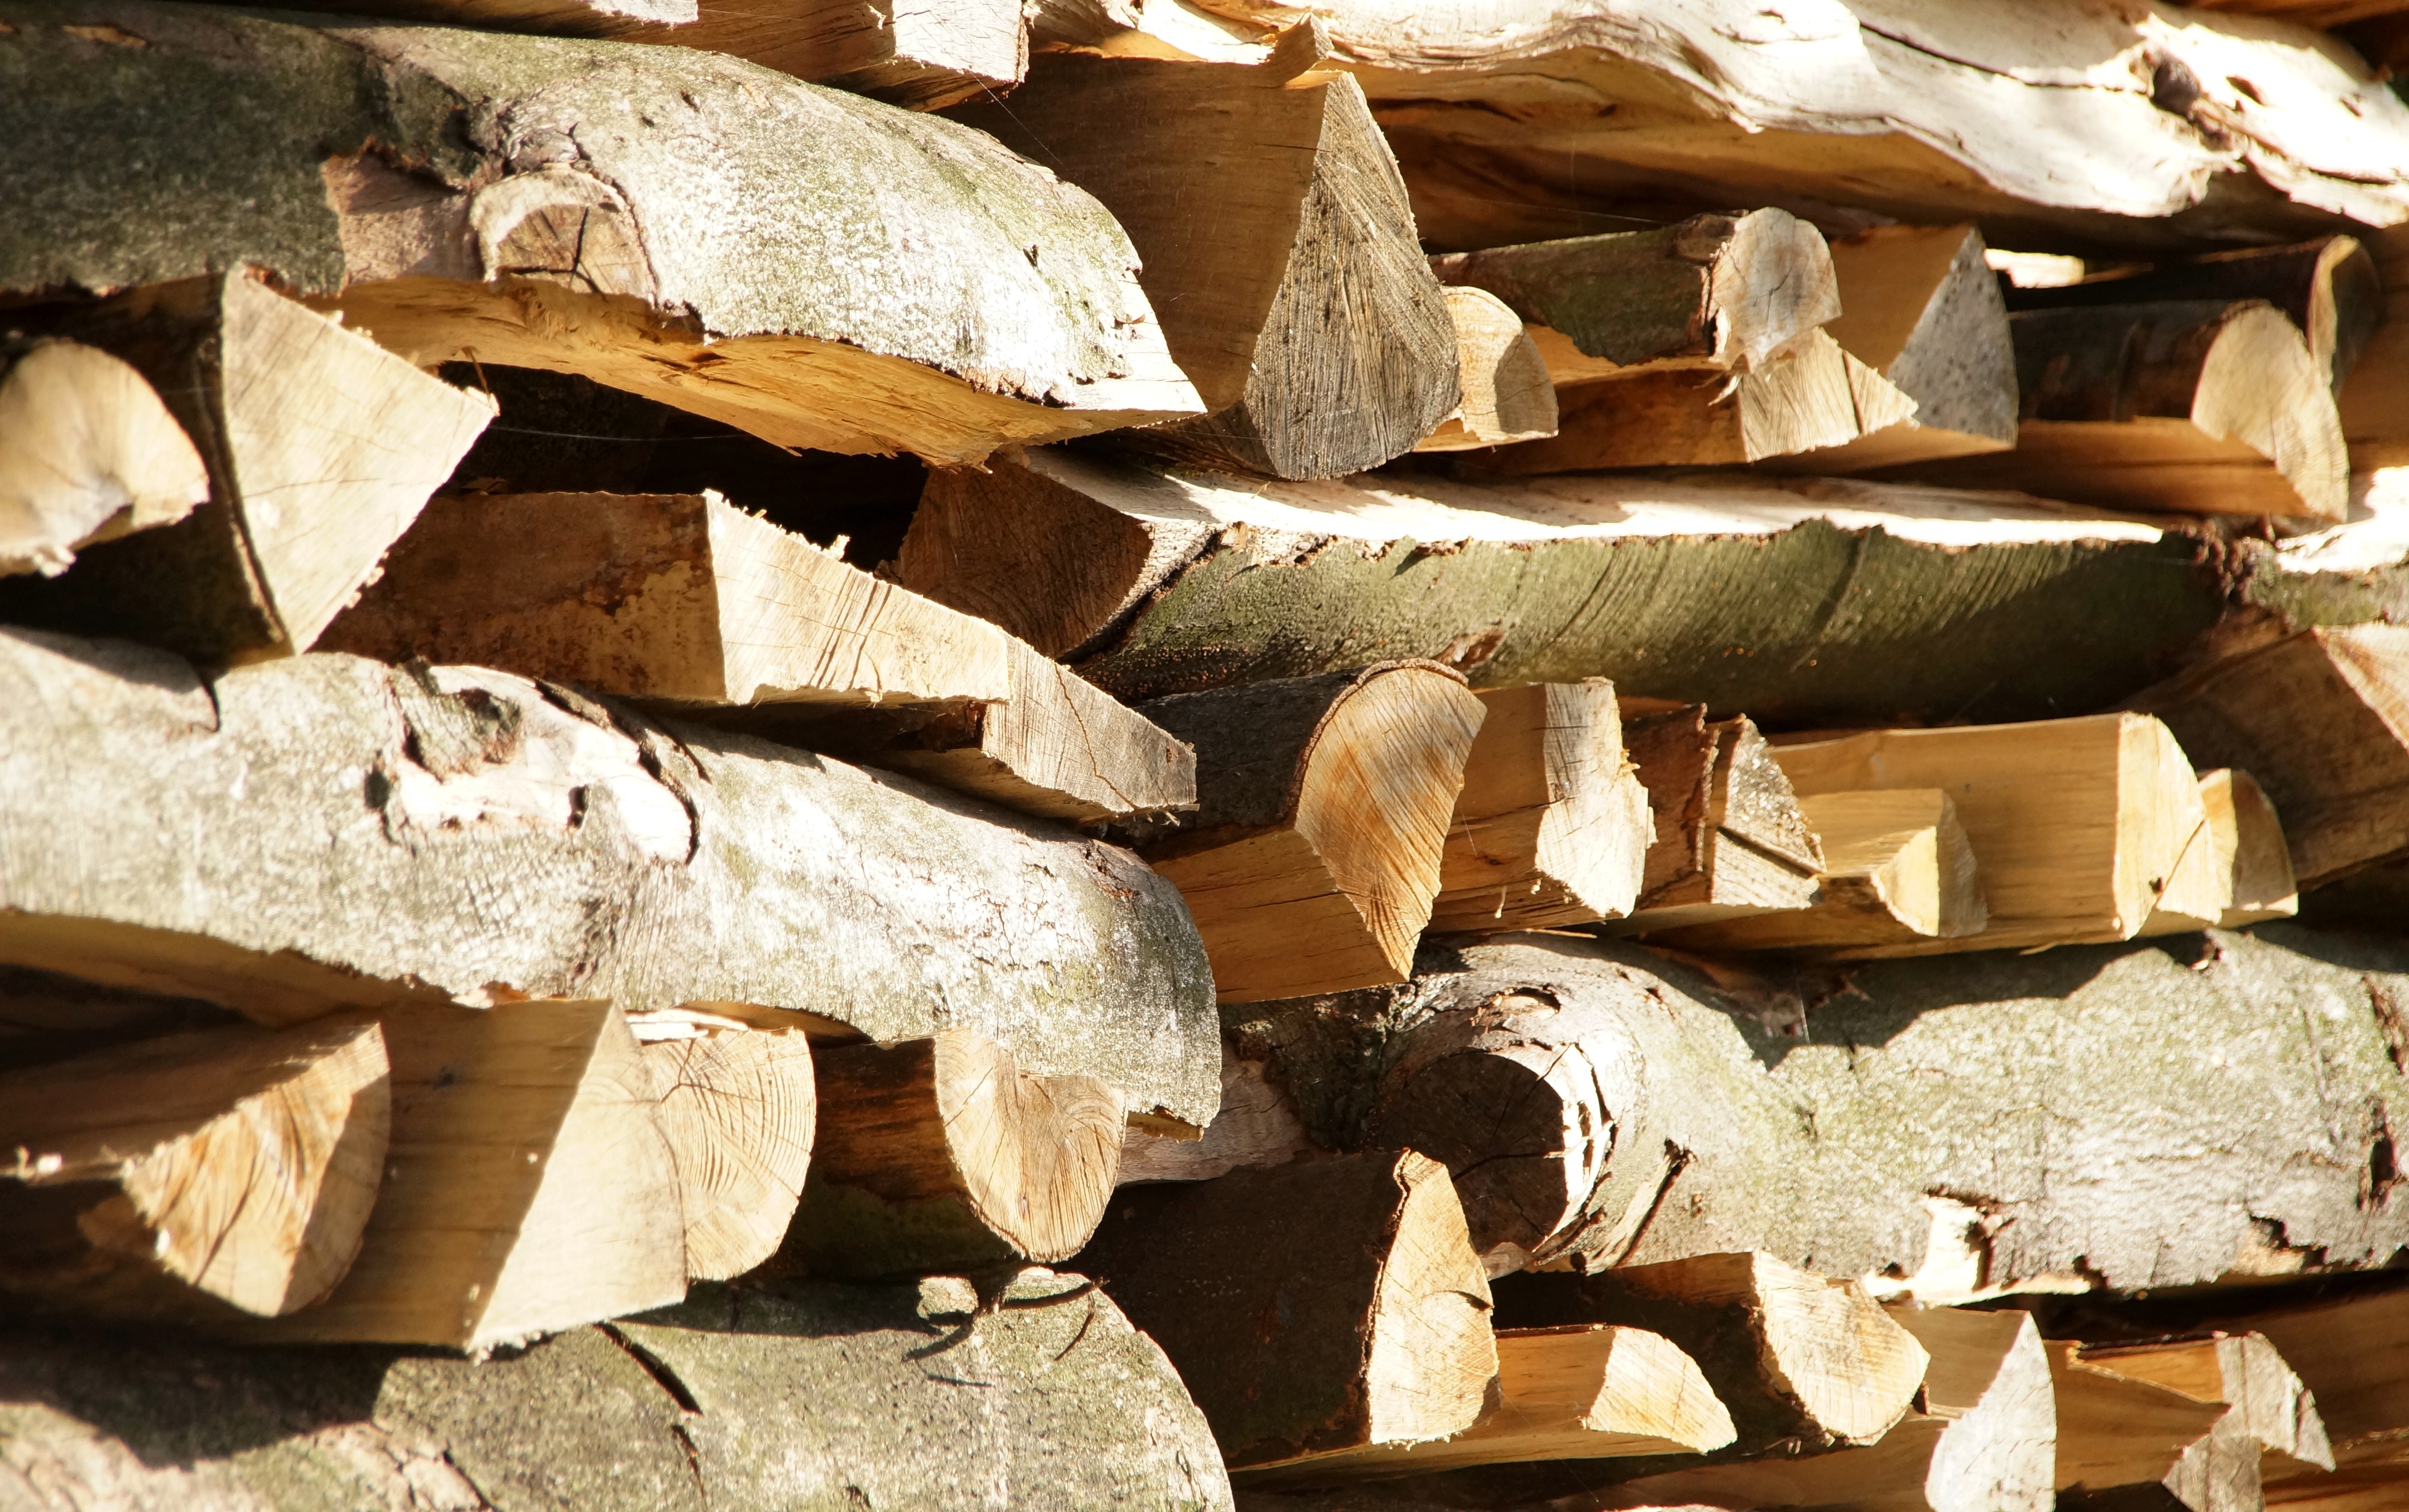 Nature, Wood, Firewood, Craft, Landscape, wood - material, stack